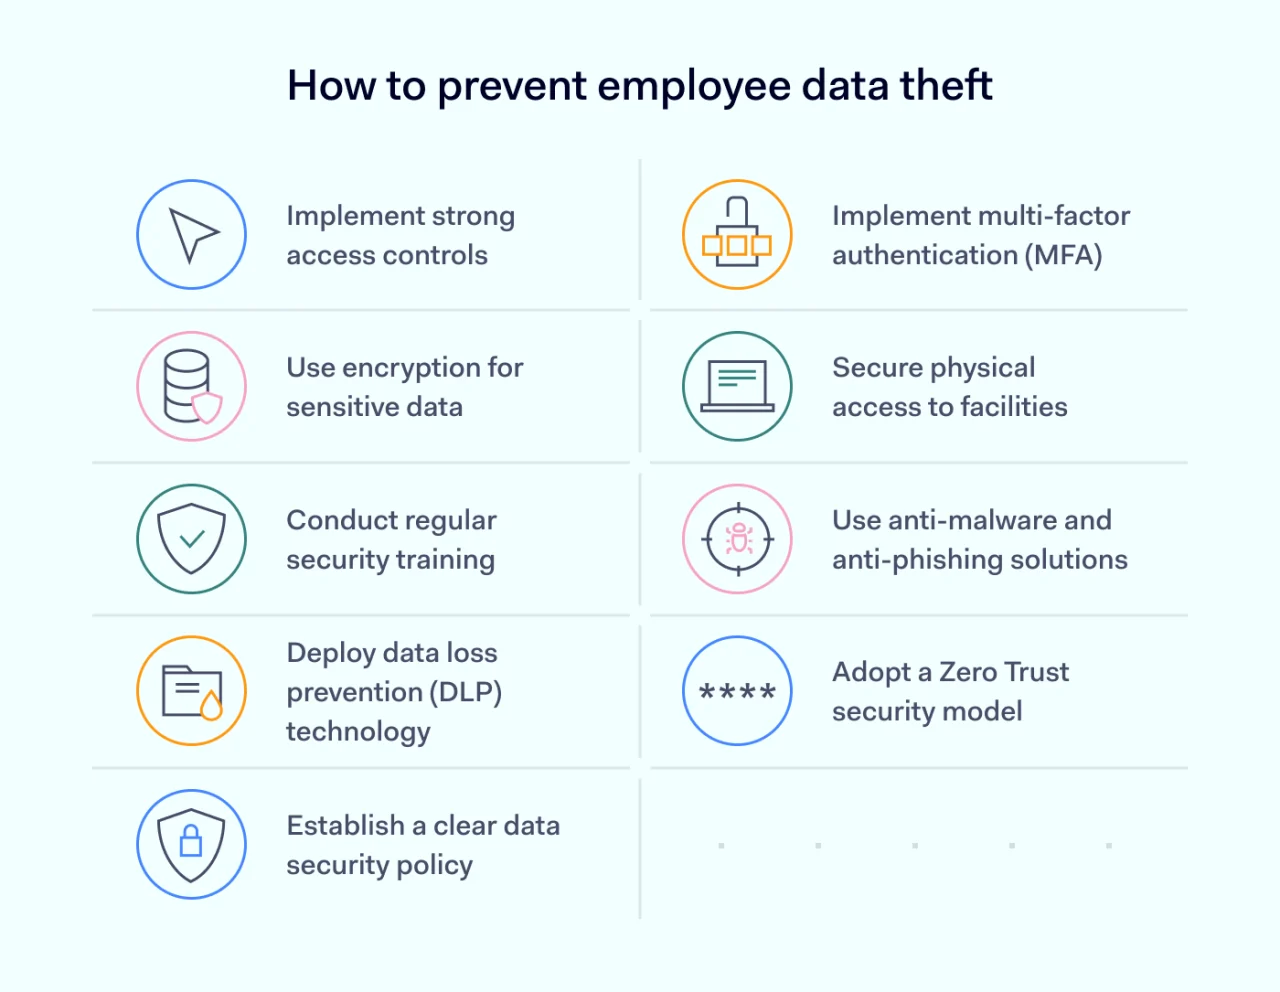 How to prevent data theft by employees